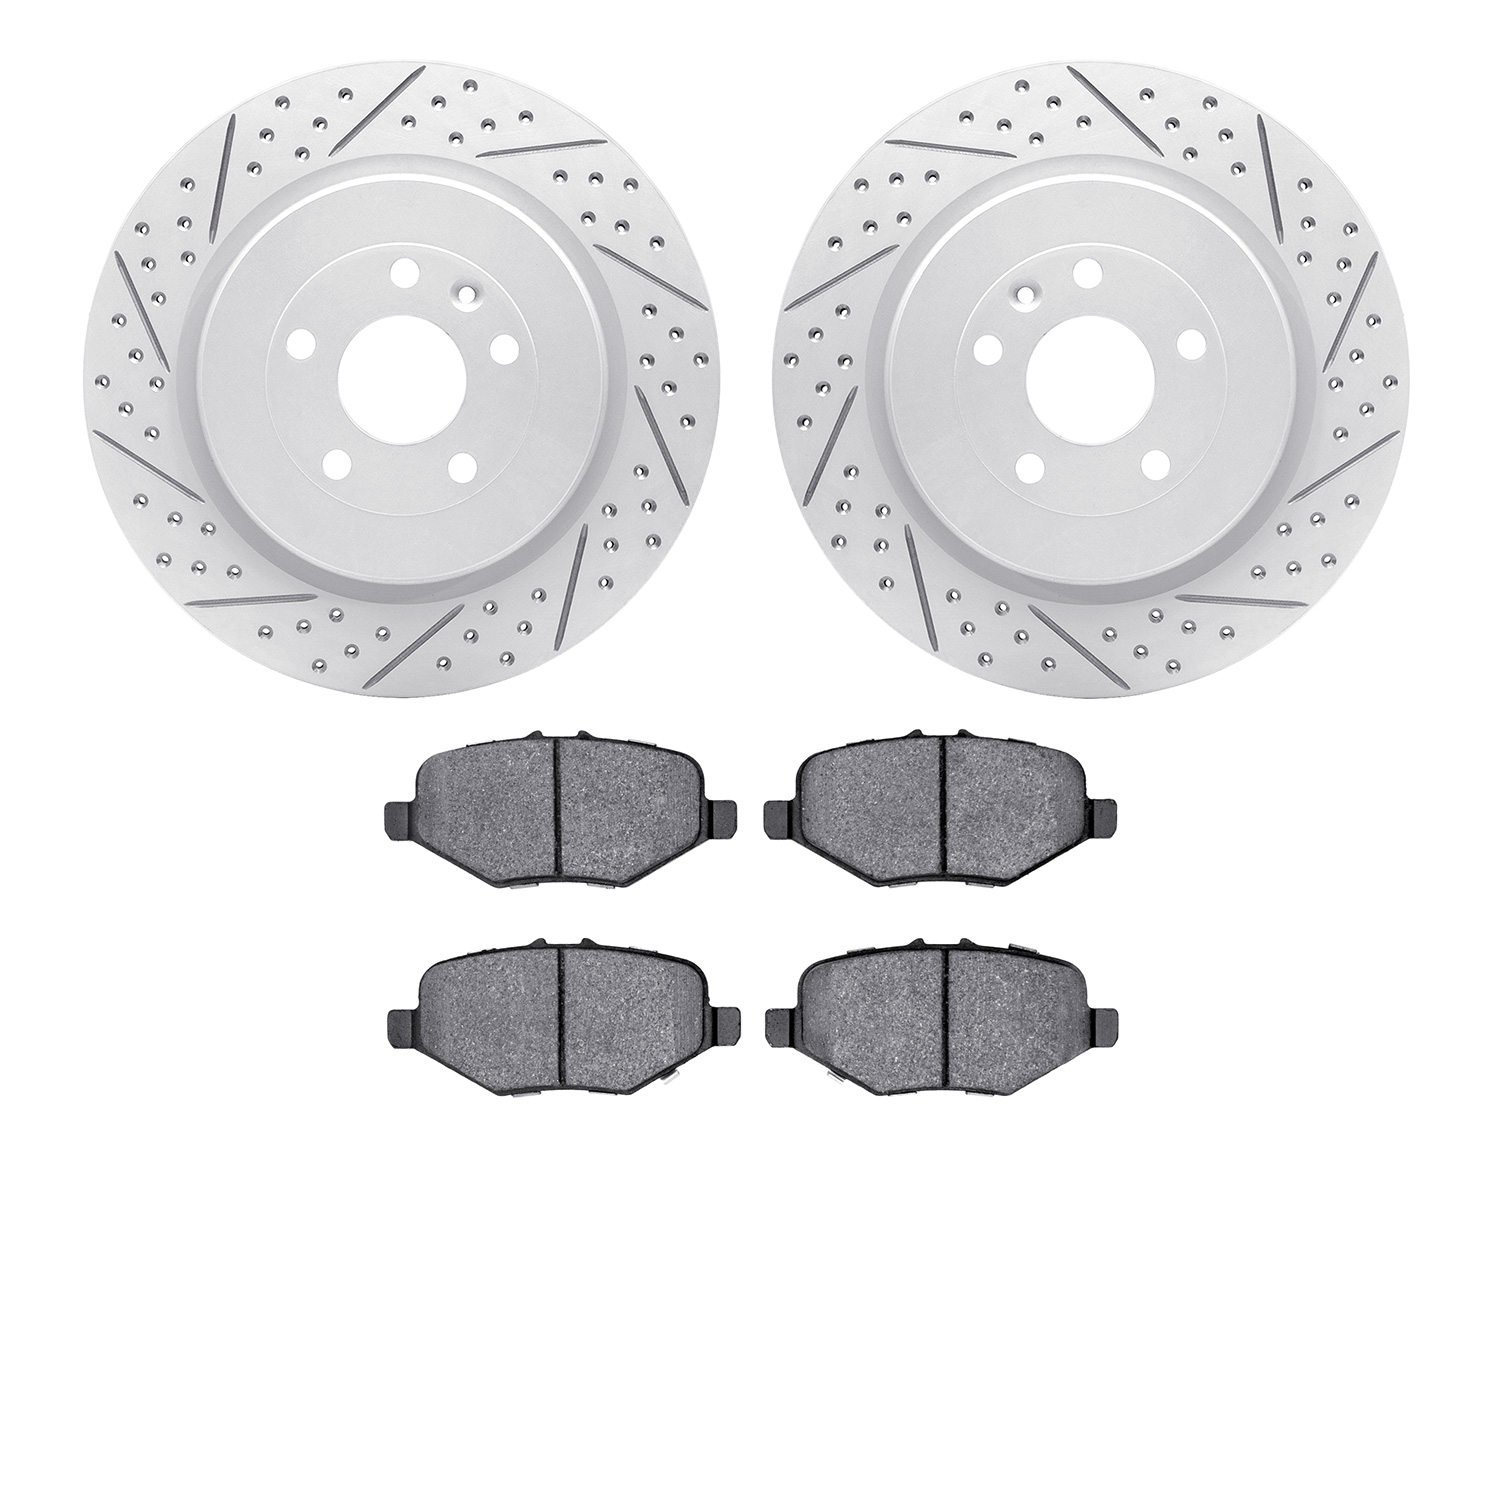 2502-54215 Geoperformance Drilled/Slotted Rotors w/5000 Advanced Brake Pads Kit, 2013-2019 Ford/Lincoln/Mercury/Mazda, Position: